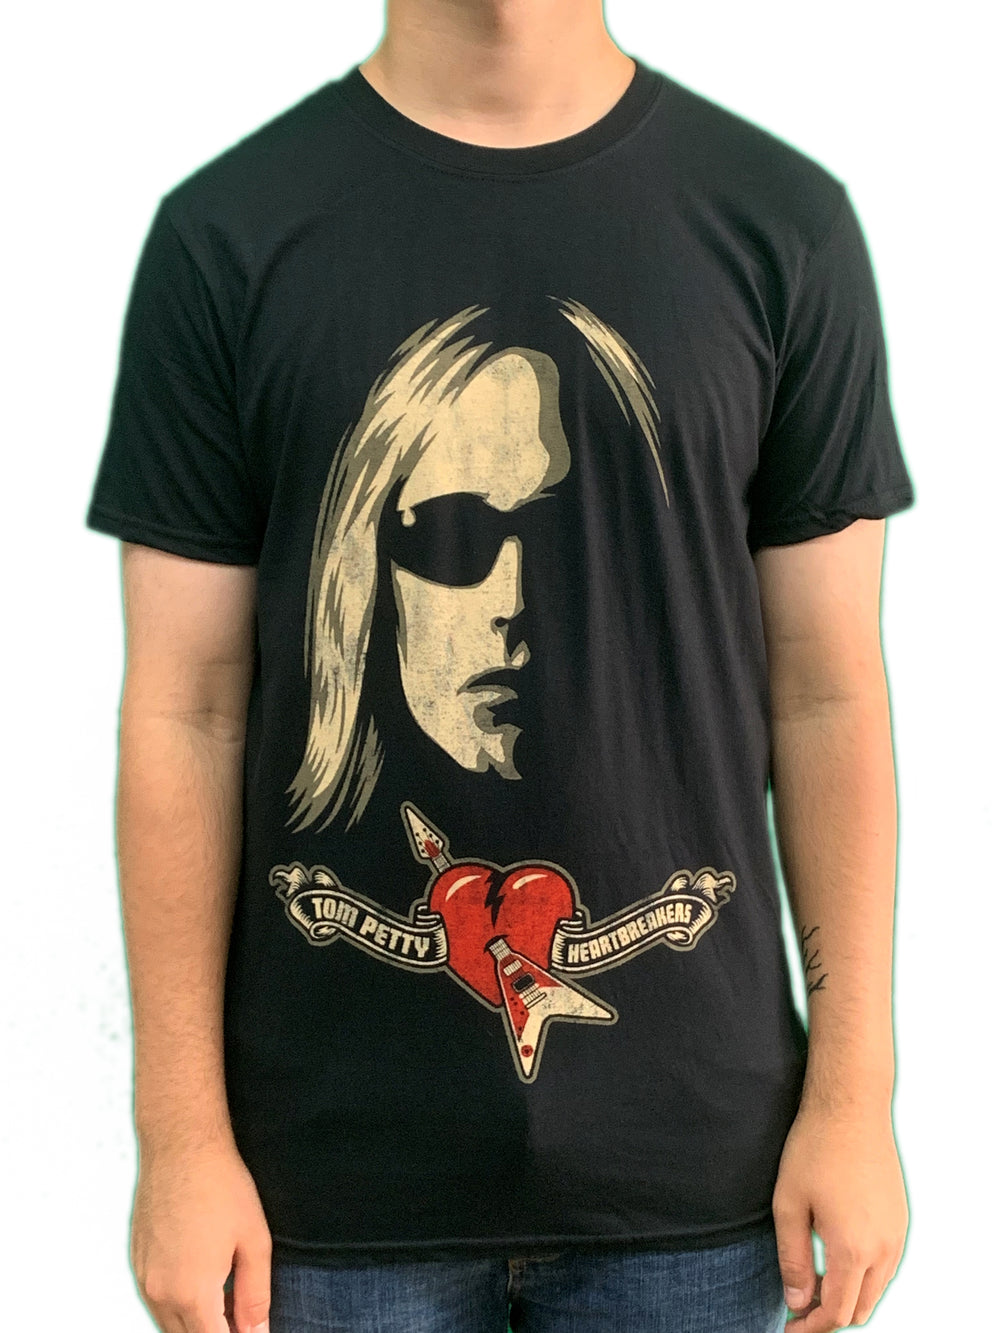 Tom Petty & The Heartbreakers - Shades Unisex Official T Shirt Brand New Various Sizes